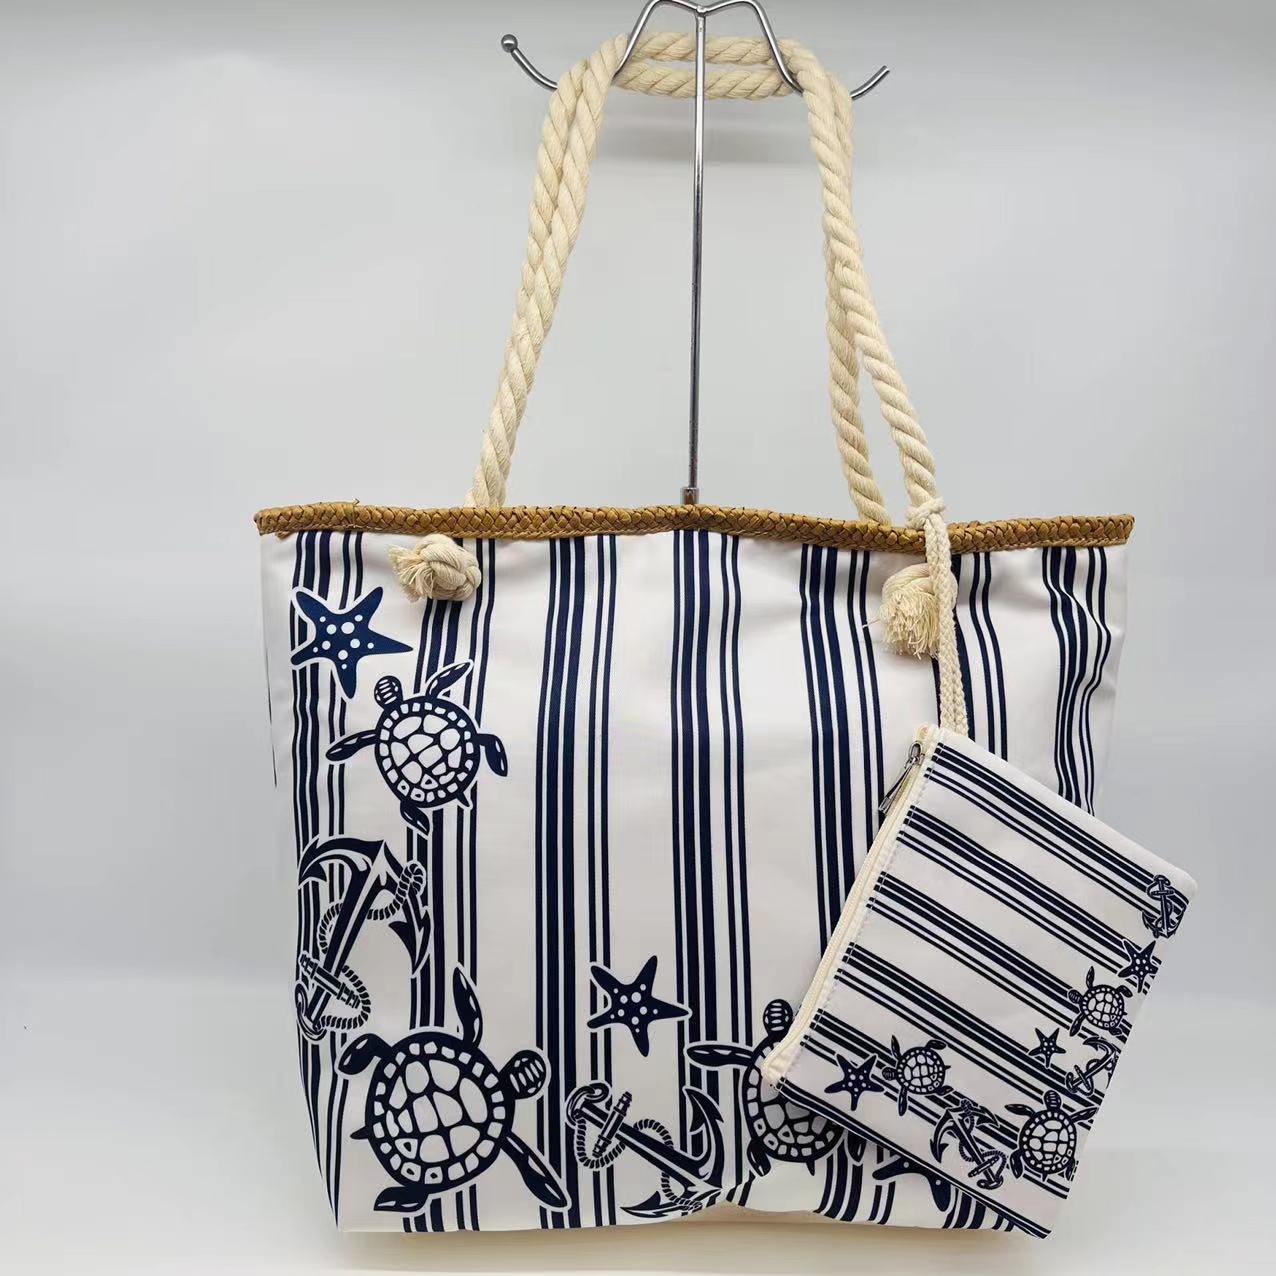 New Popular Digital Printing Straw Woven Large Capacity Beach Bag Fashionable Fashionable Personalized Women's Canvas Shoulder Bag